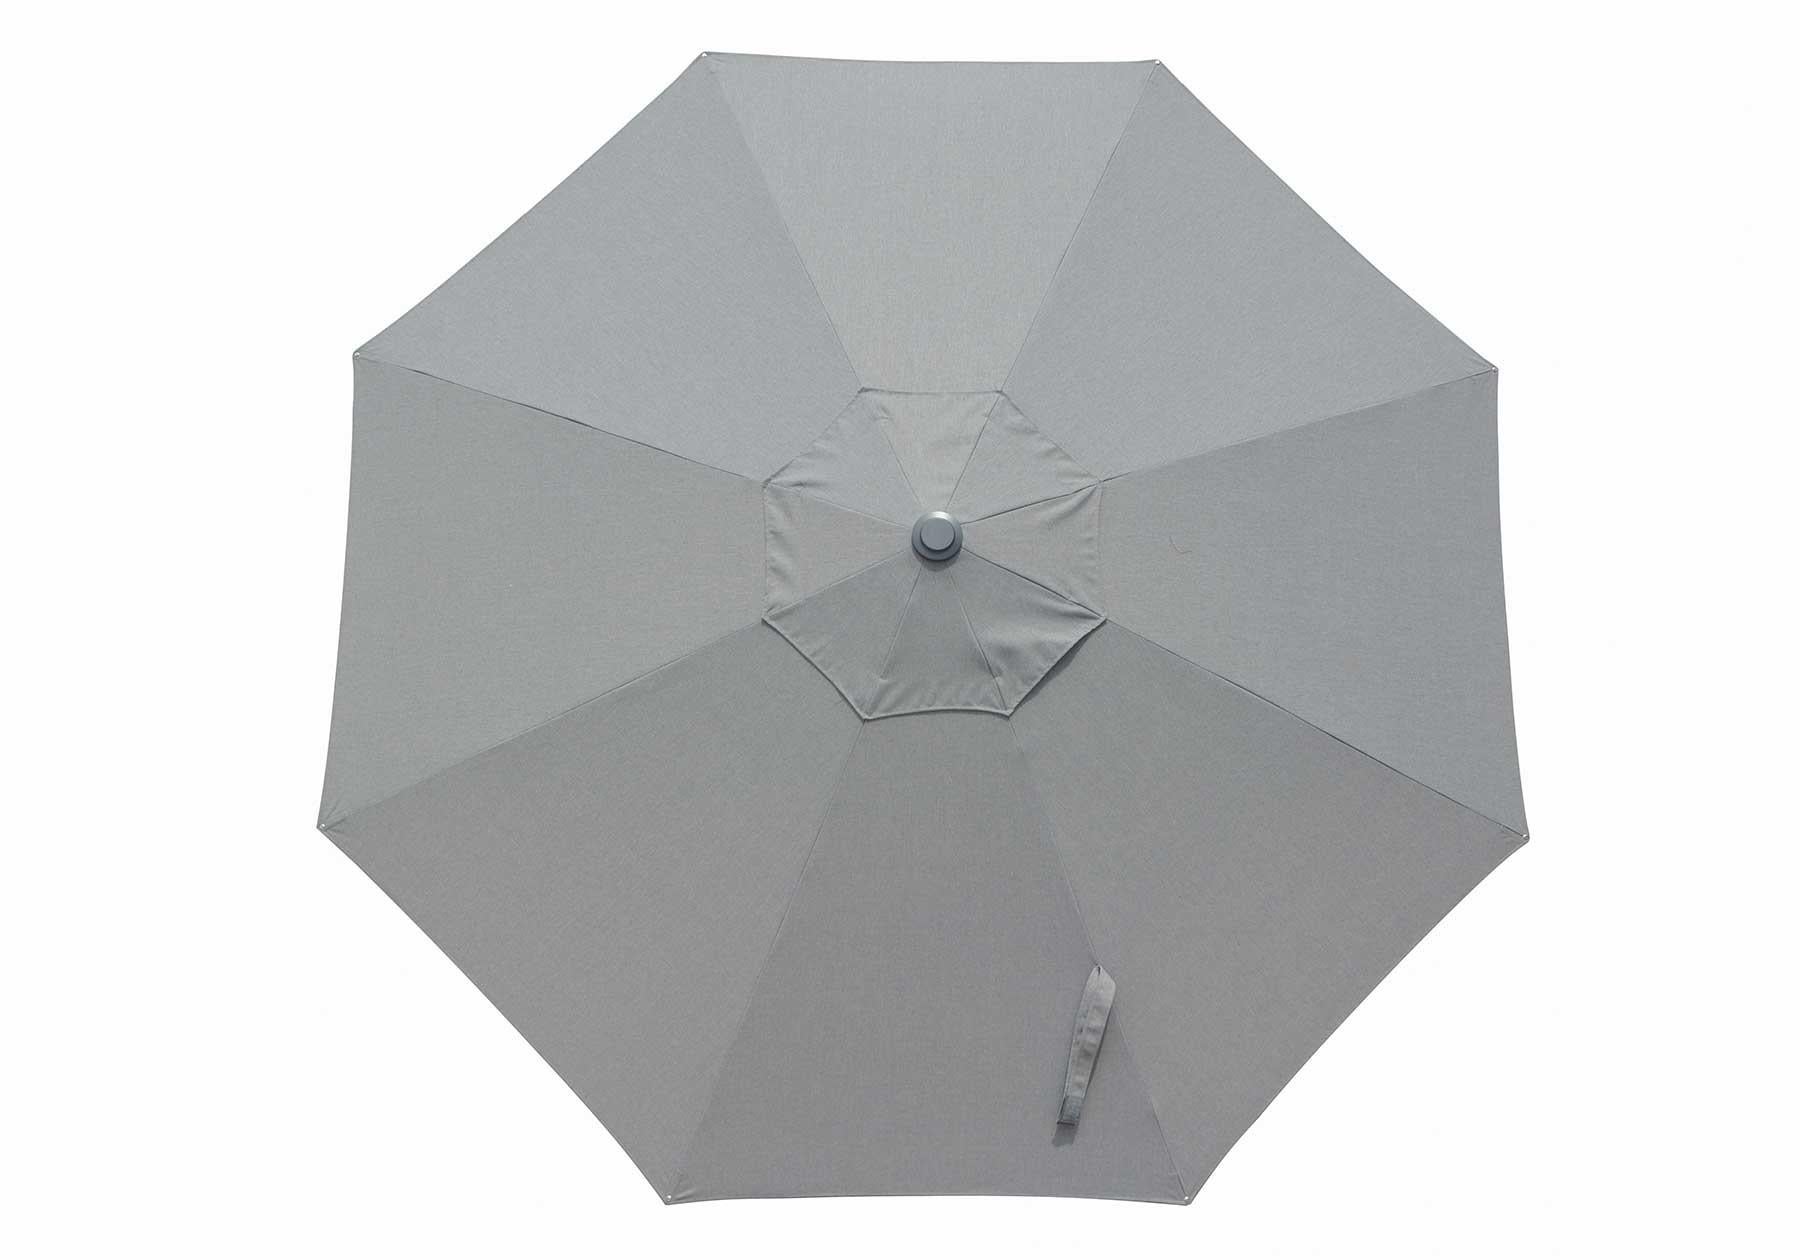 Agate Umbrella combines UV-resistant and wind-resistant special fabric and aluminum skeleton synthesis with modern design lines. While creating a modern look with aesthetic refinement in your outdoor areas; Agate umbrella, which allows you to create